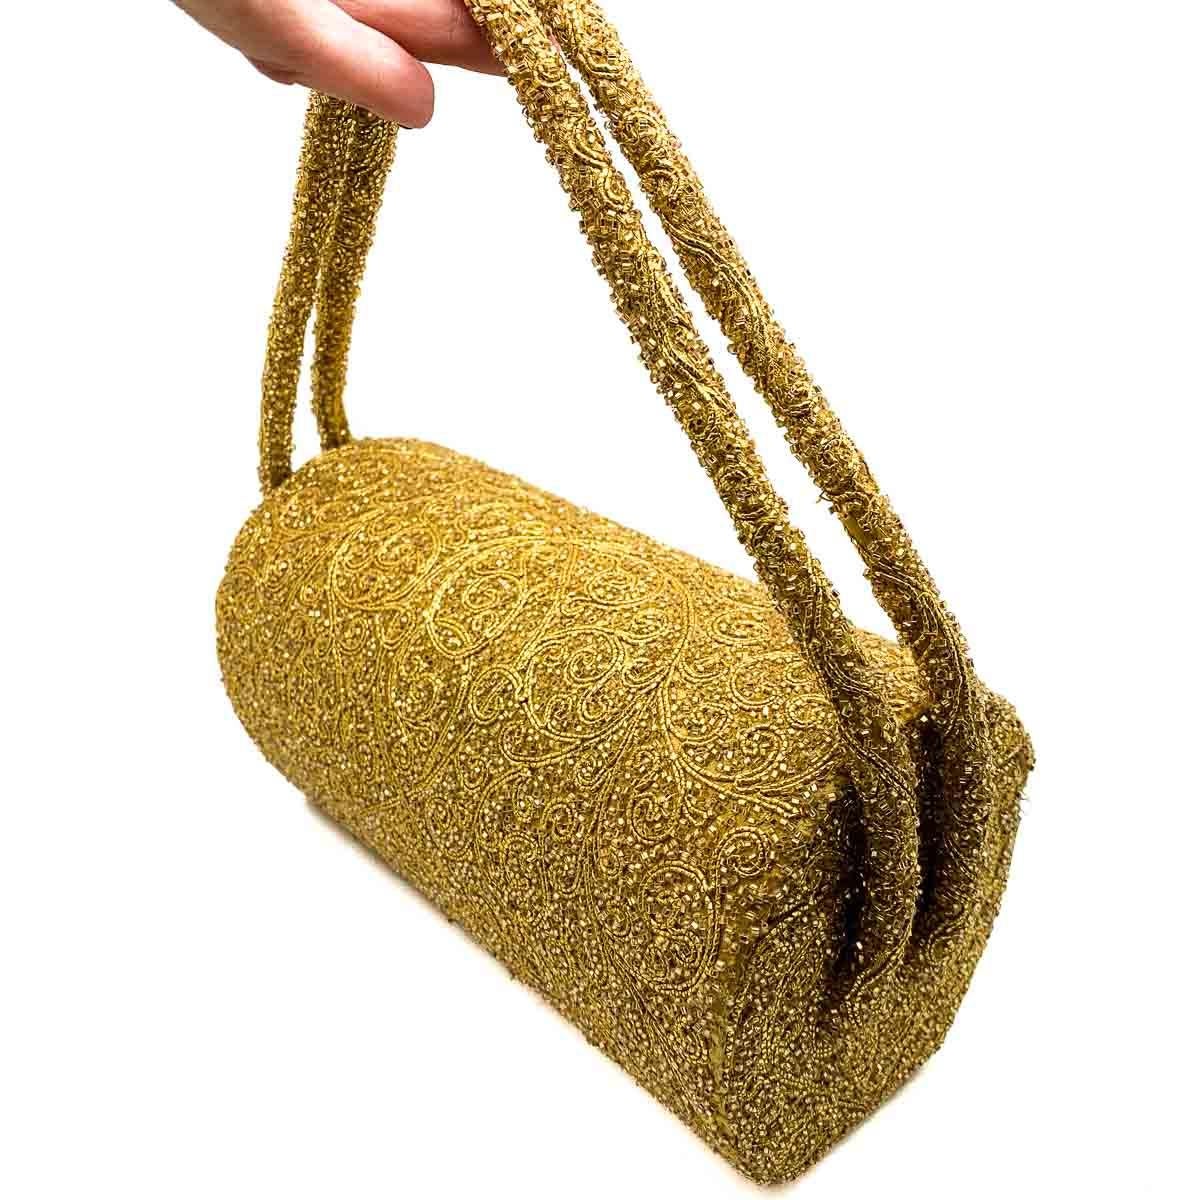 Vintage Nettie Rosenstein Gold Cylindrical Beaded Evening Bag 1930s In Good Condition For Sale In Wilmslow, GB